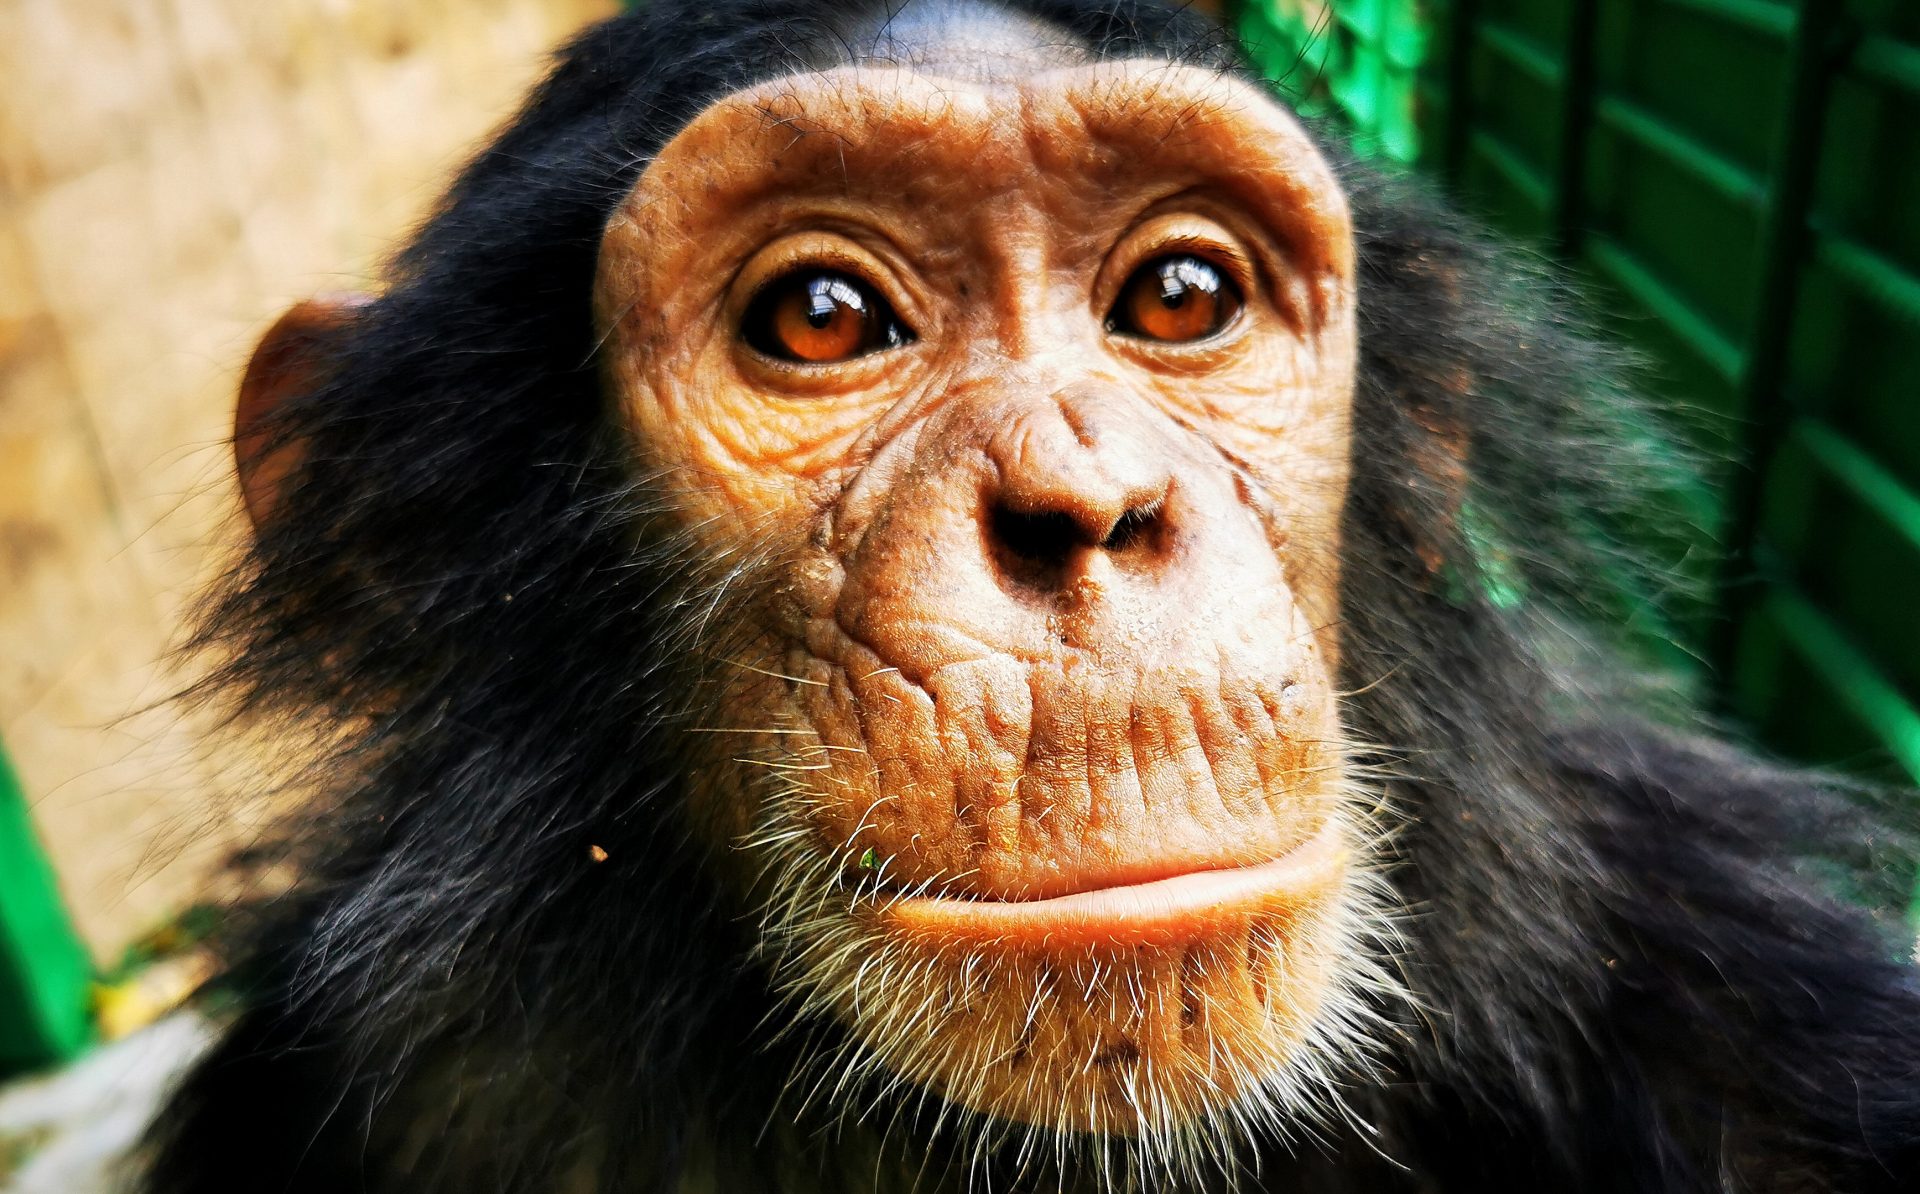 GIVING DAY FOR APES – Doguy, one-eyed chimpanzee